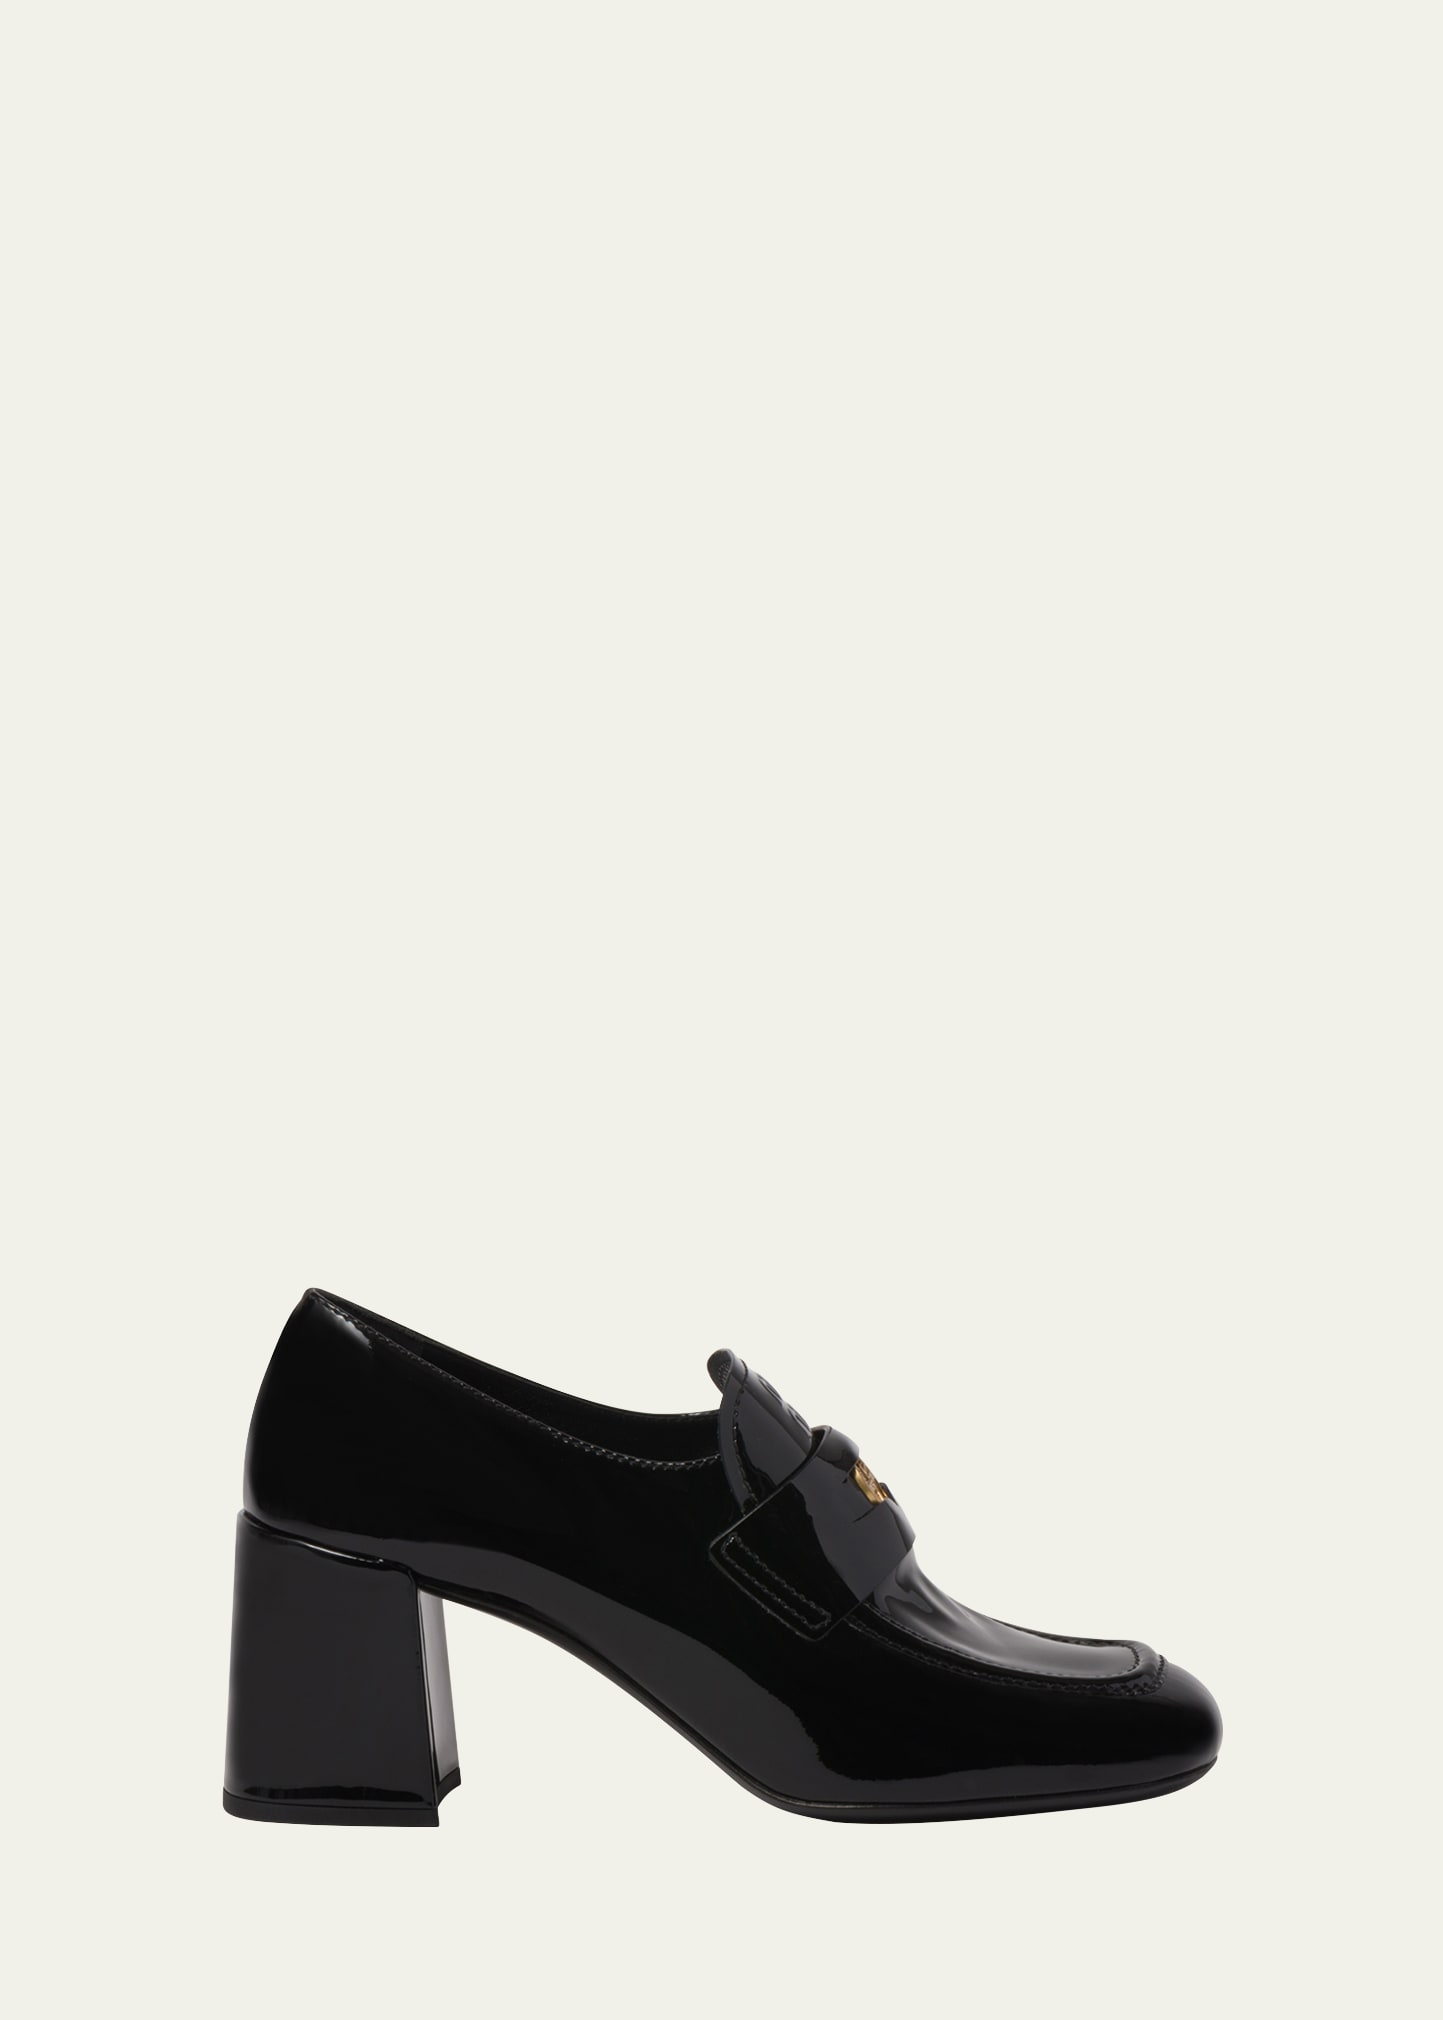 Miu Miu Patent Leather Heeled Penny Loafers In Avorio